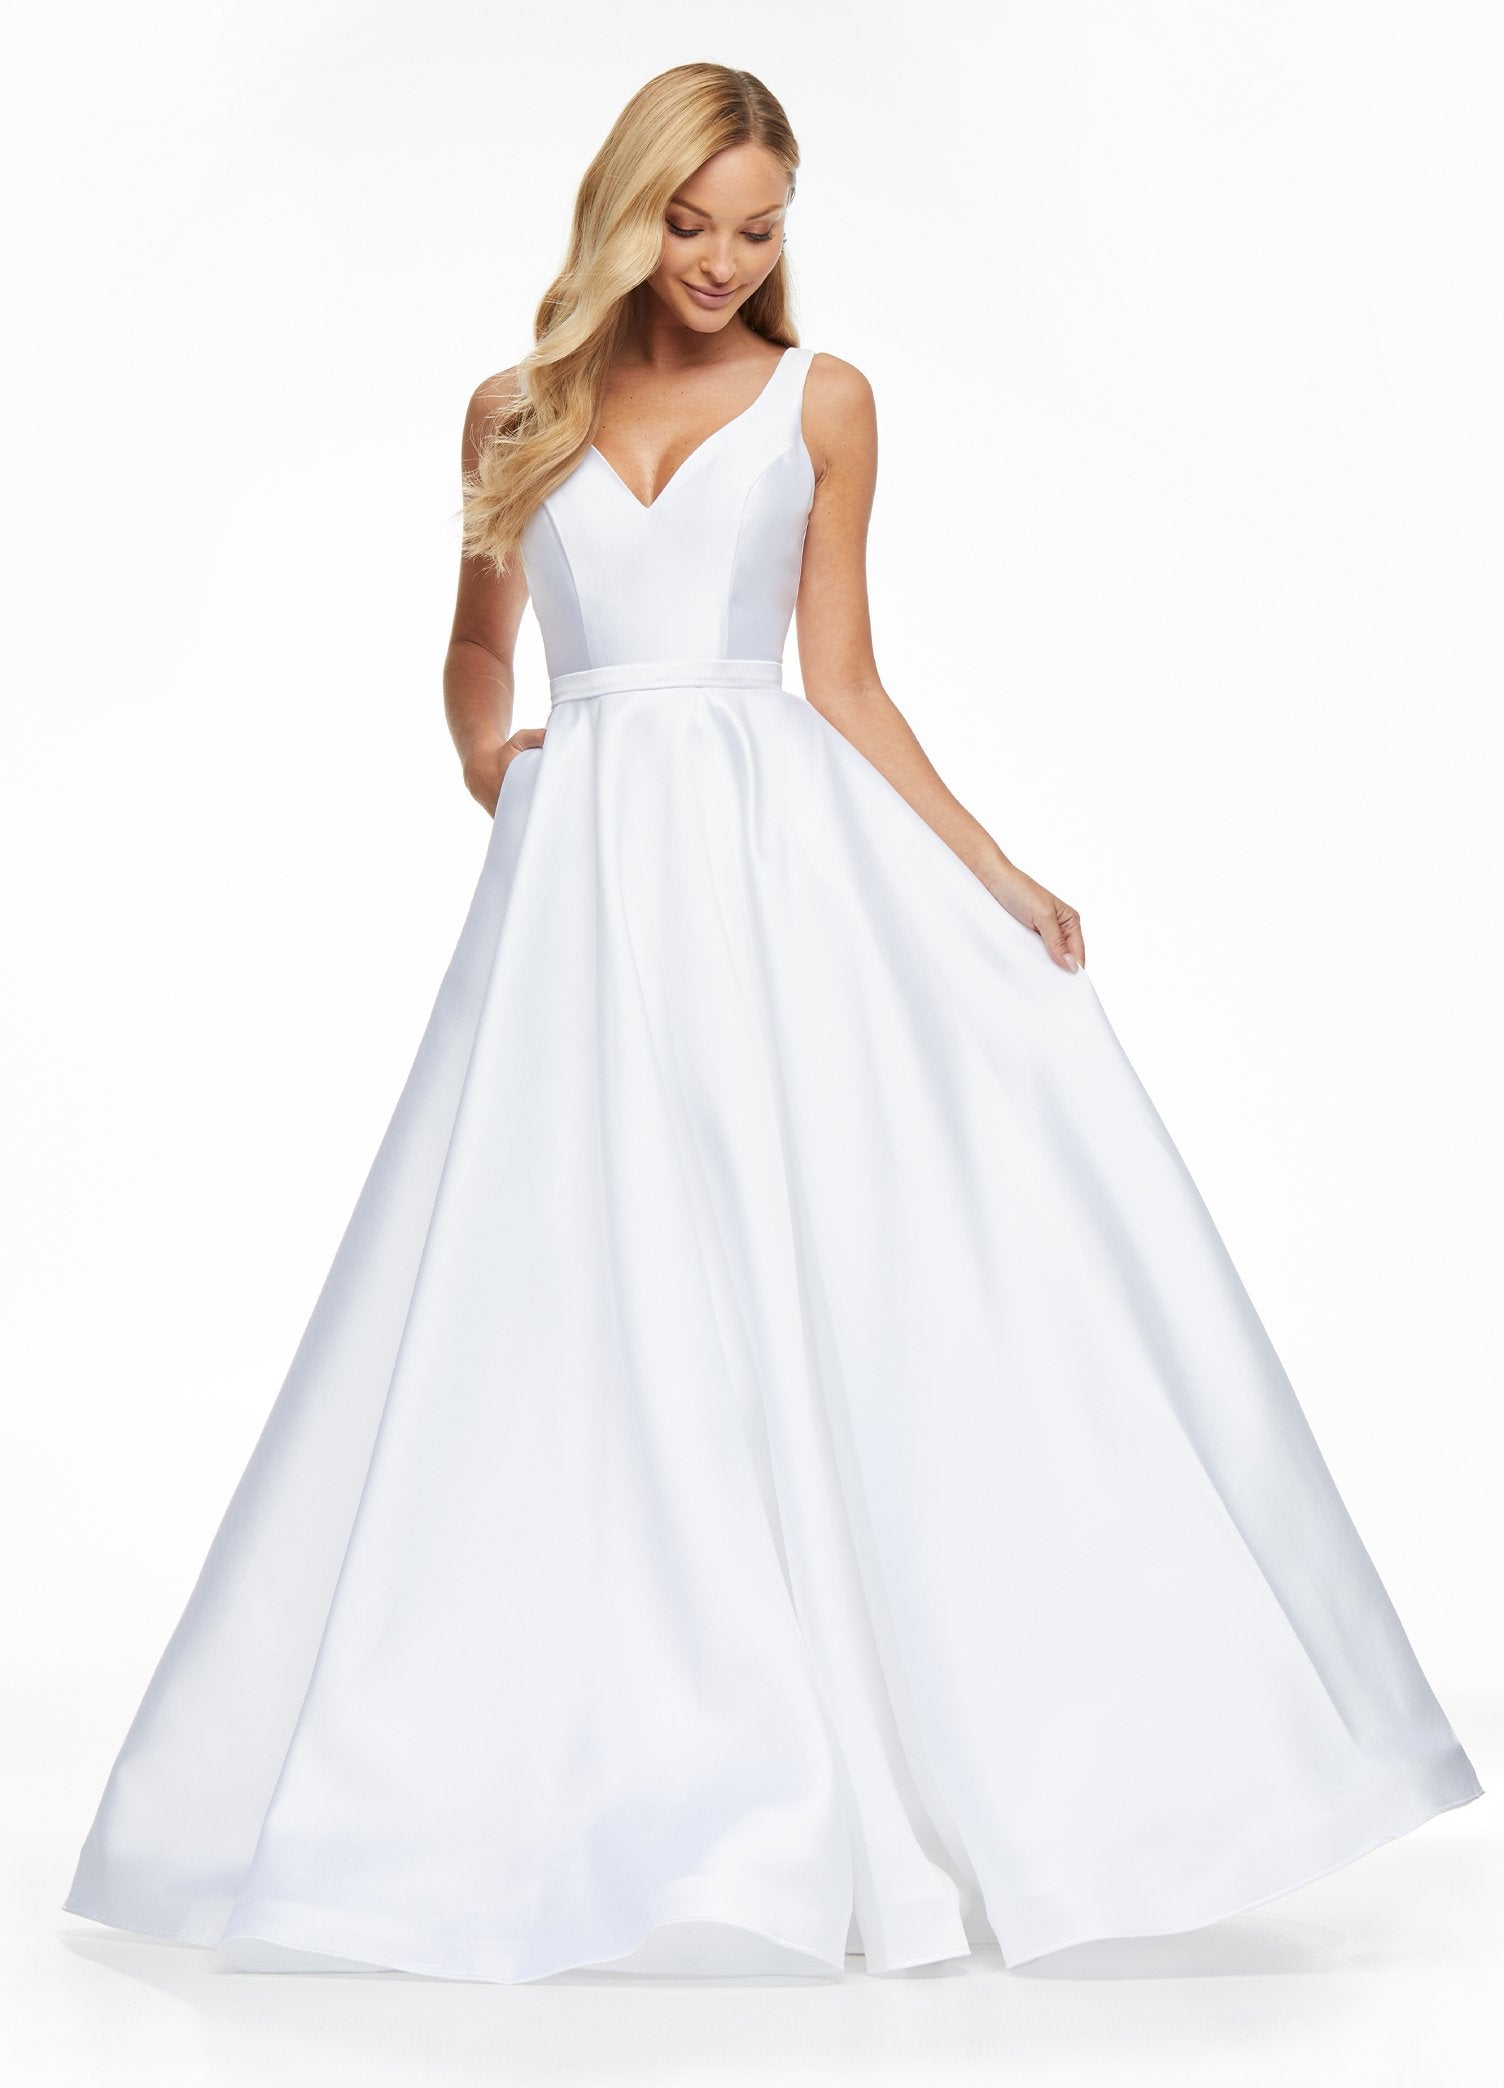 Ashley-Lauren-11094-white-prom-dress-front-a-line-mikado-satin-v-neckline-v-backAshley Lauren 11094 White Prom Dress.  This is a lovely A line prom, pageant and wedding dress made of mikado satin.  It has a v neckline and a v back. Great for your destination wedding or pageant.  Color:  White  Sizes:  12